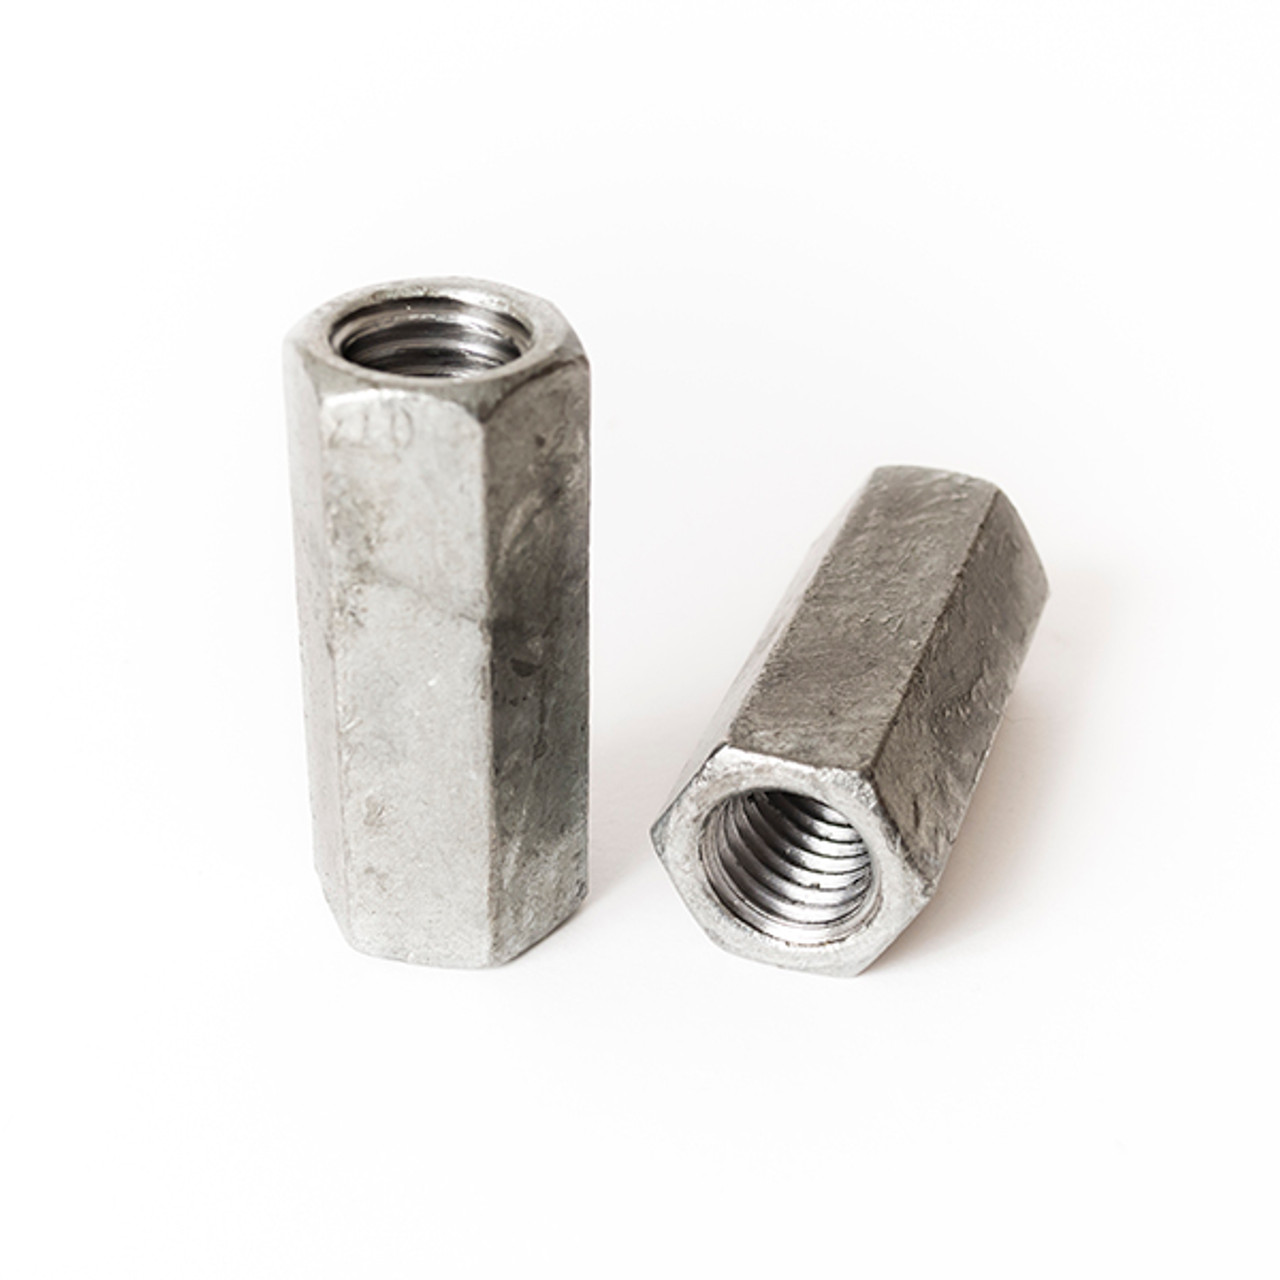 Chicago Coupling Nuts from Westech Rigging Supply